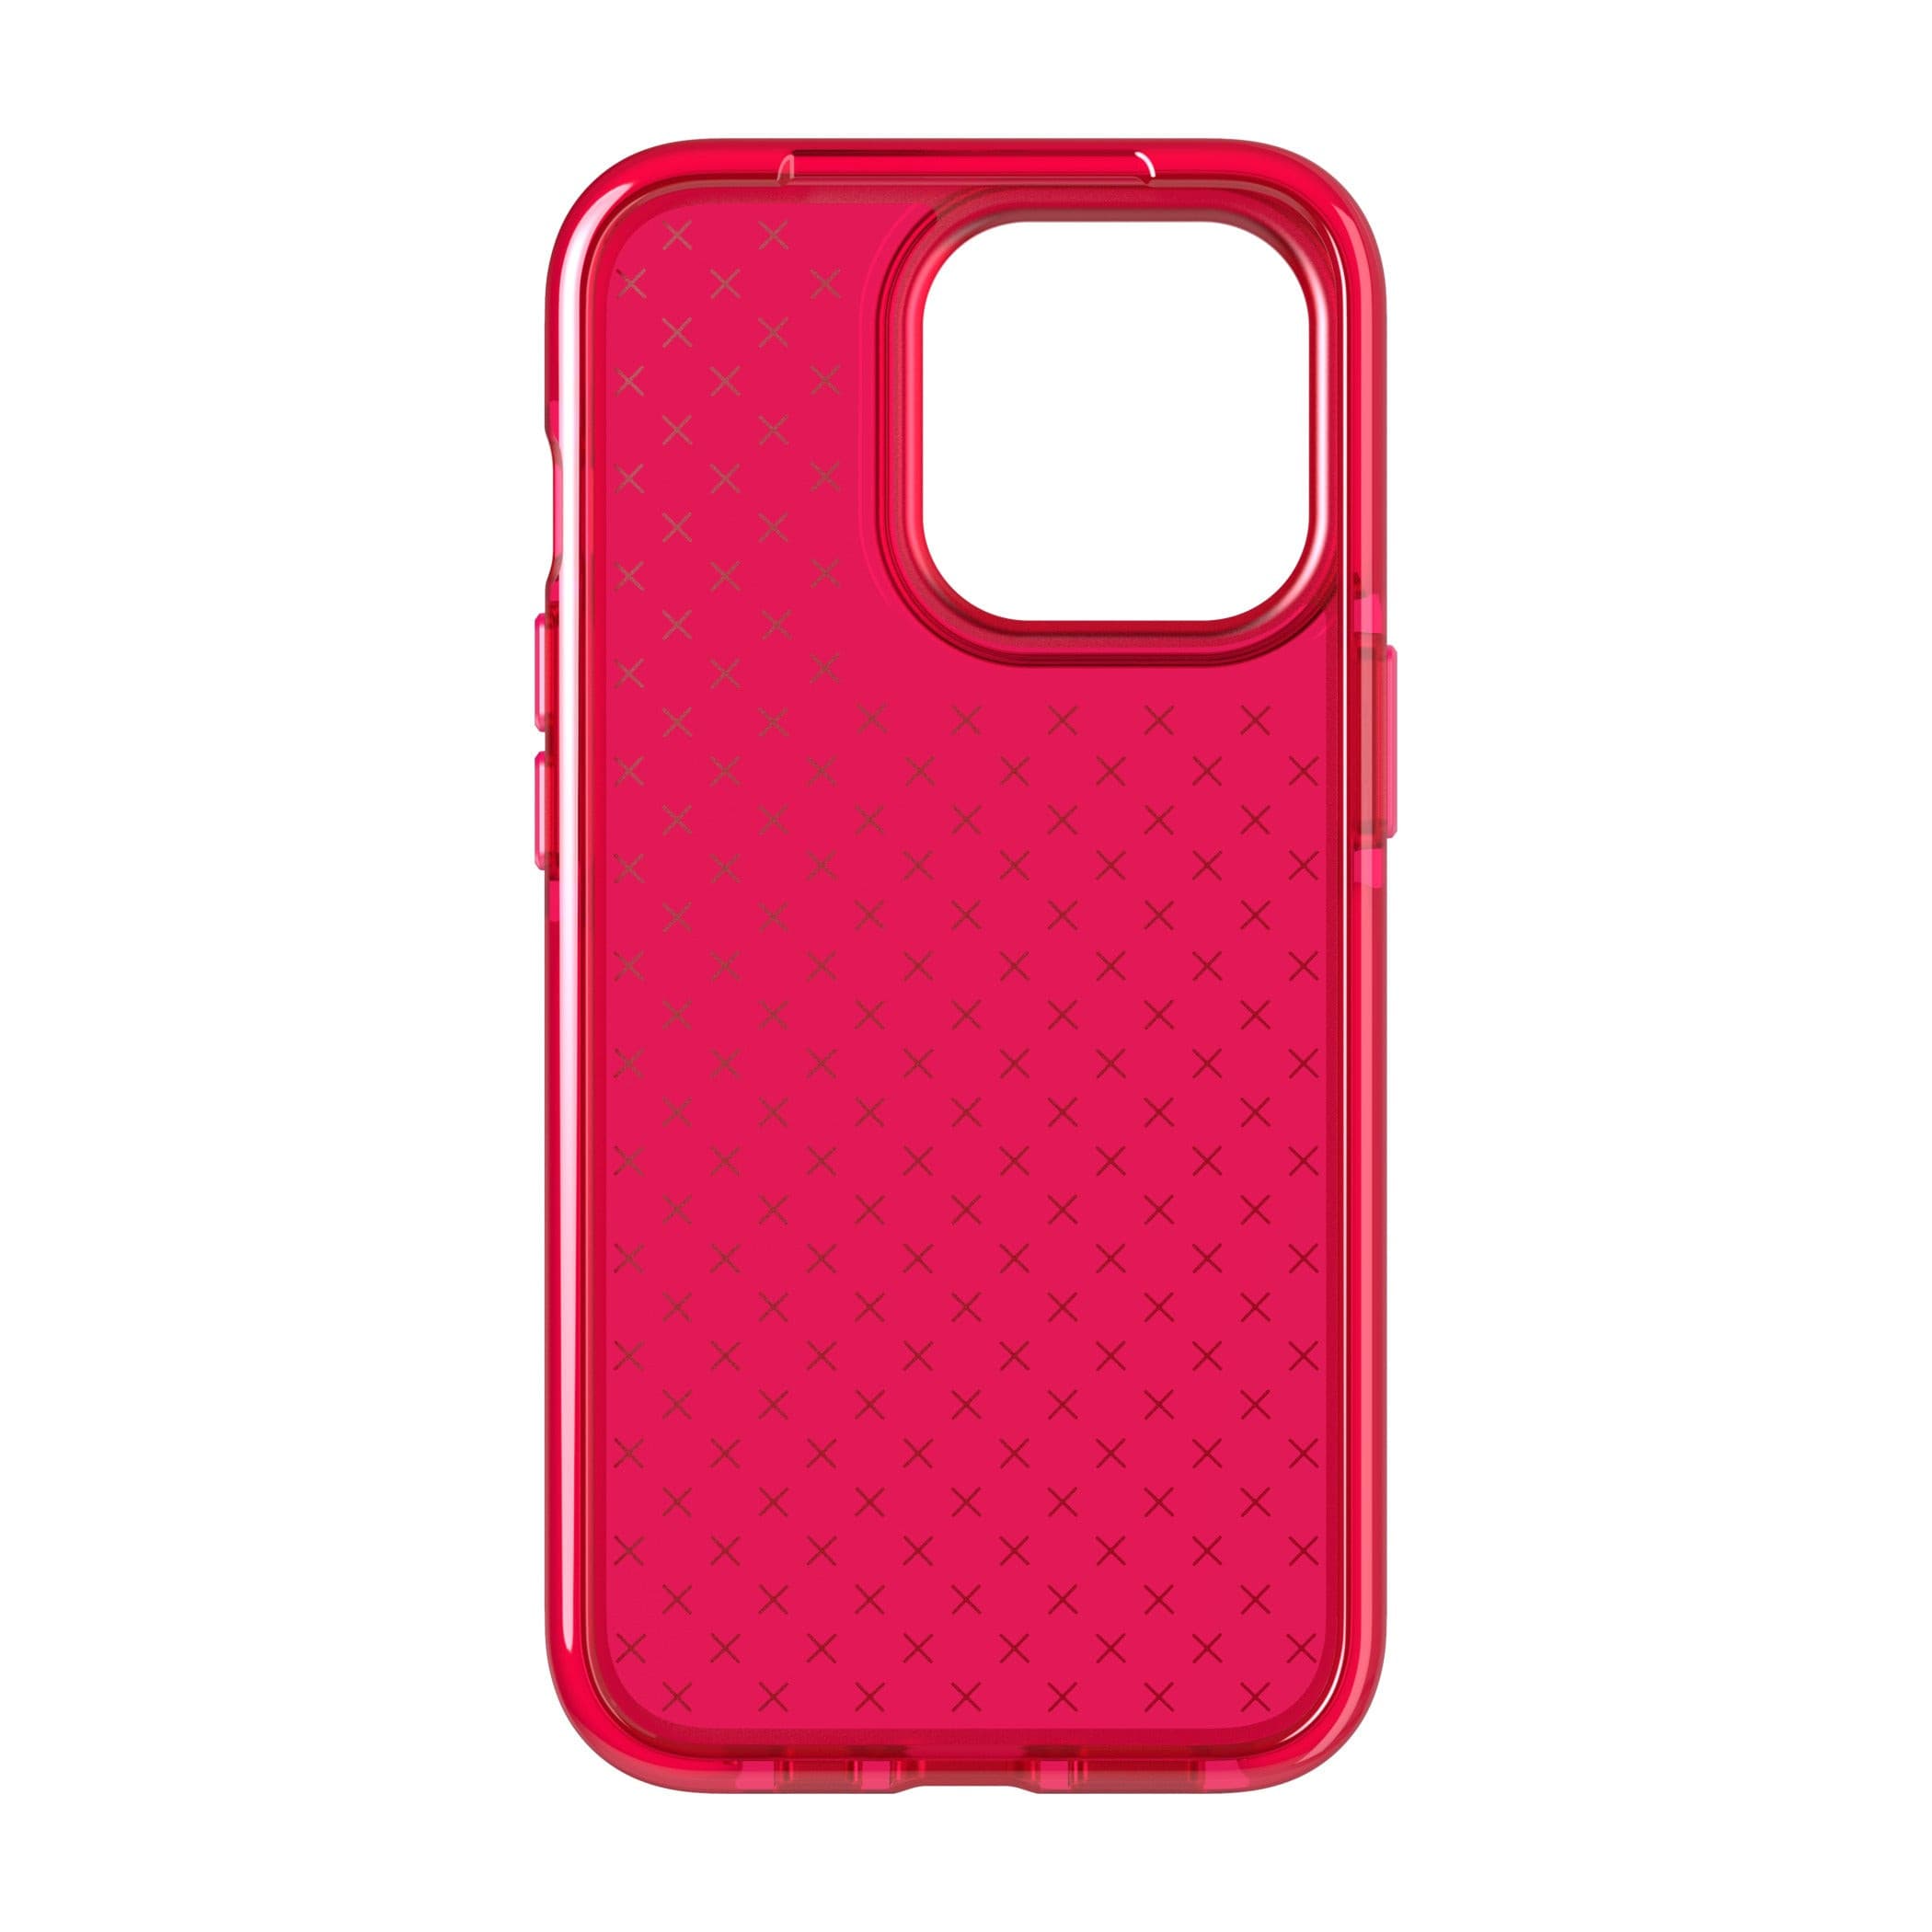 Tech21 EvoCheck Phone Case for iPhone 13 Pro.